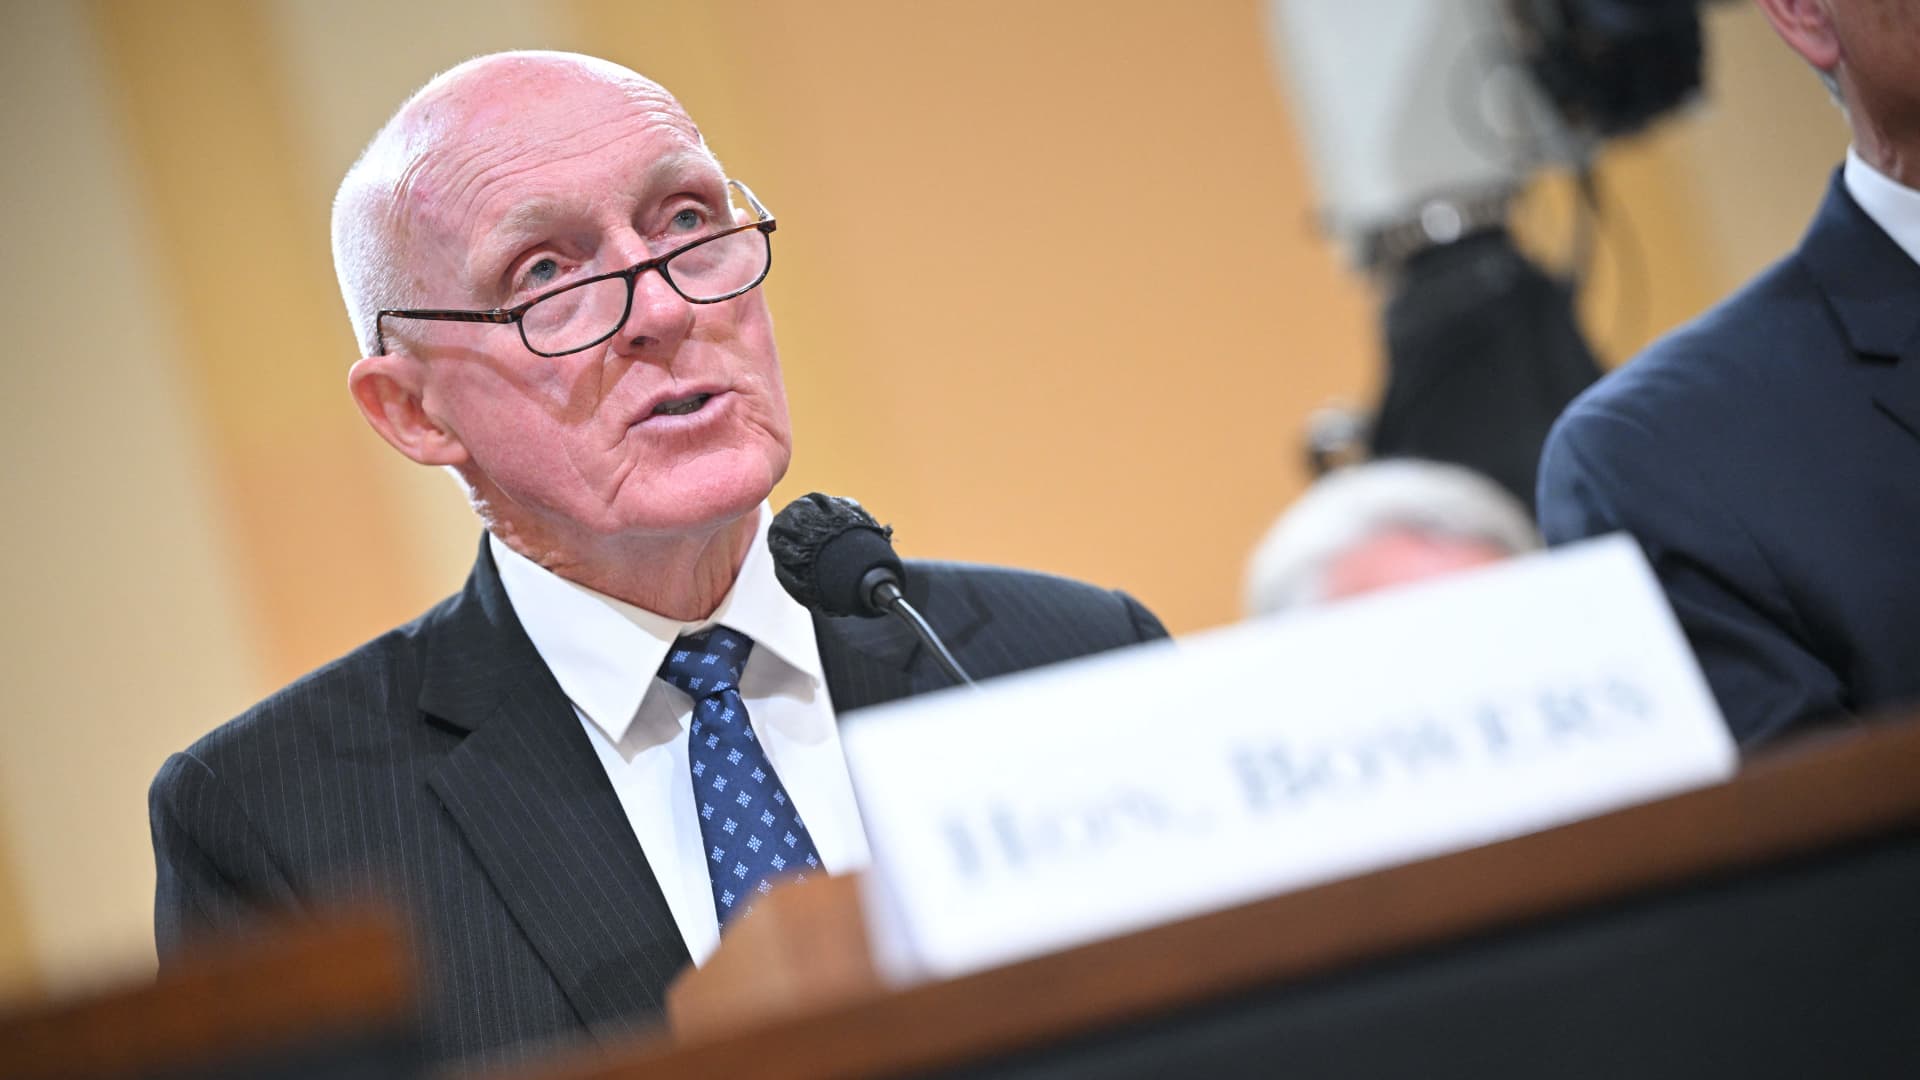 Rusty Bowers, Arizona House Speaker, speaks during the fourth hearing by the House Select Committee to Investigate the January 6th Attack on the US Capitol in the Cannon House Office Building in Washington, DC, on June 21, 2022.